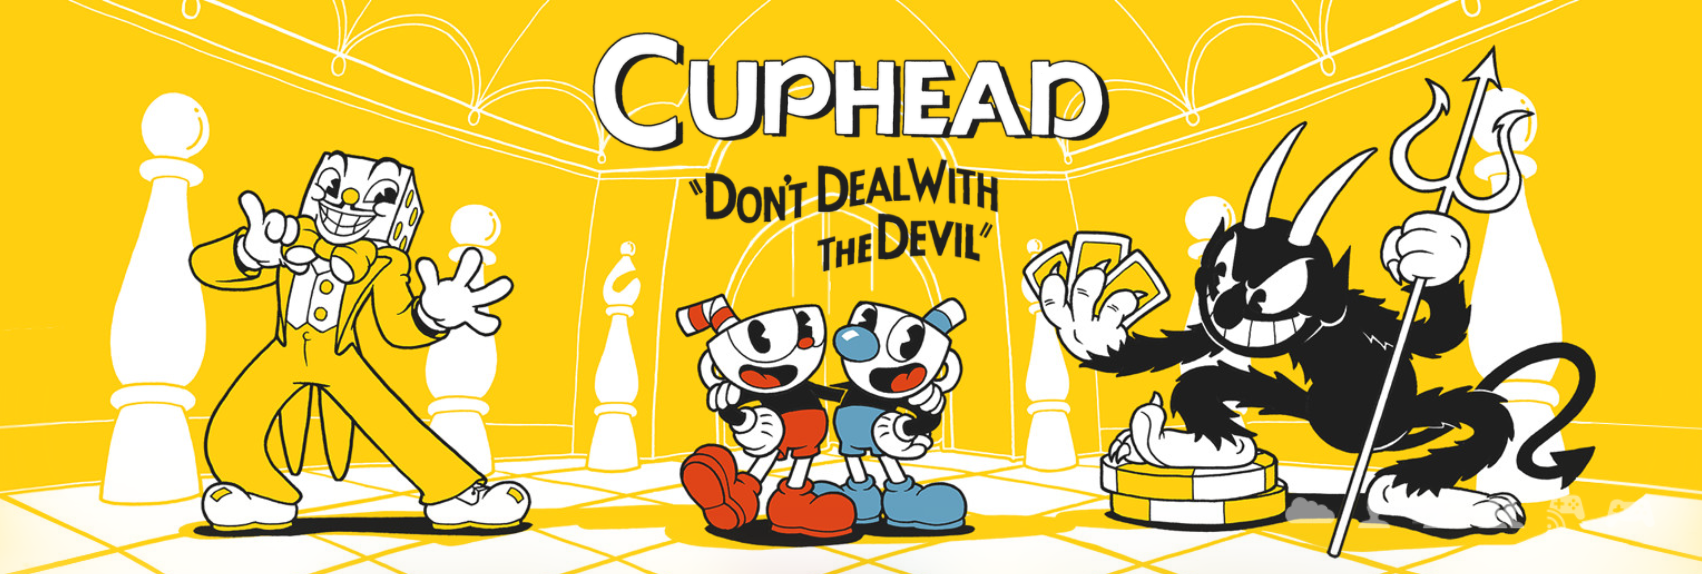 Cuphead: Don't Deal With The Devil